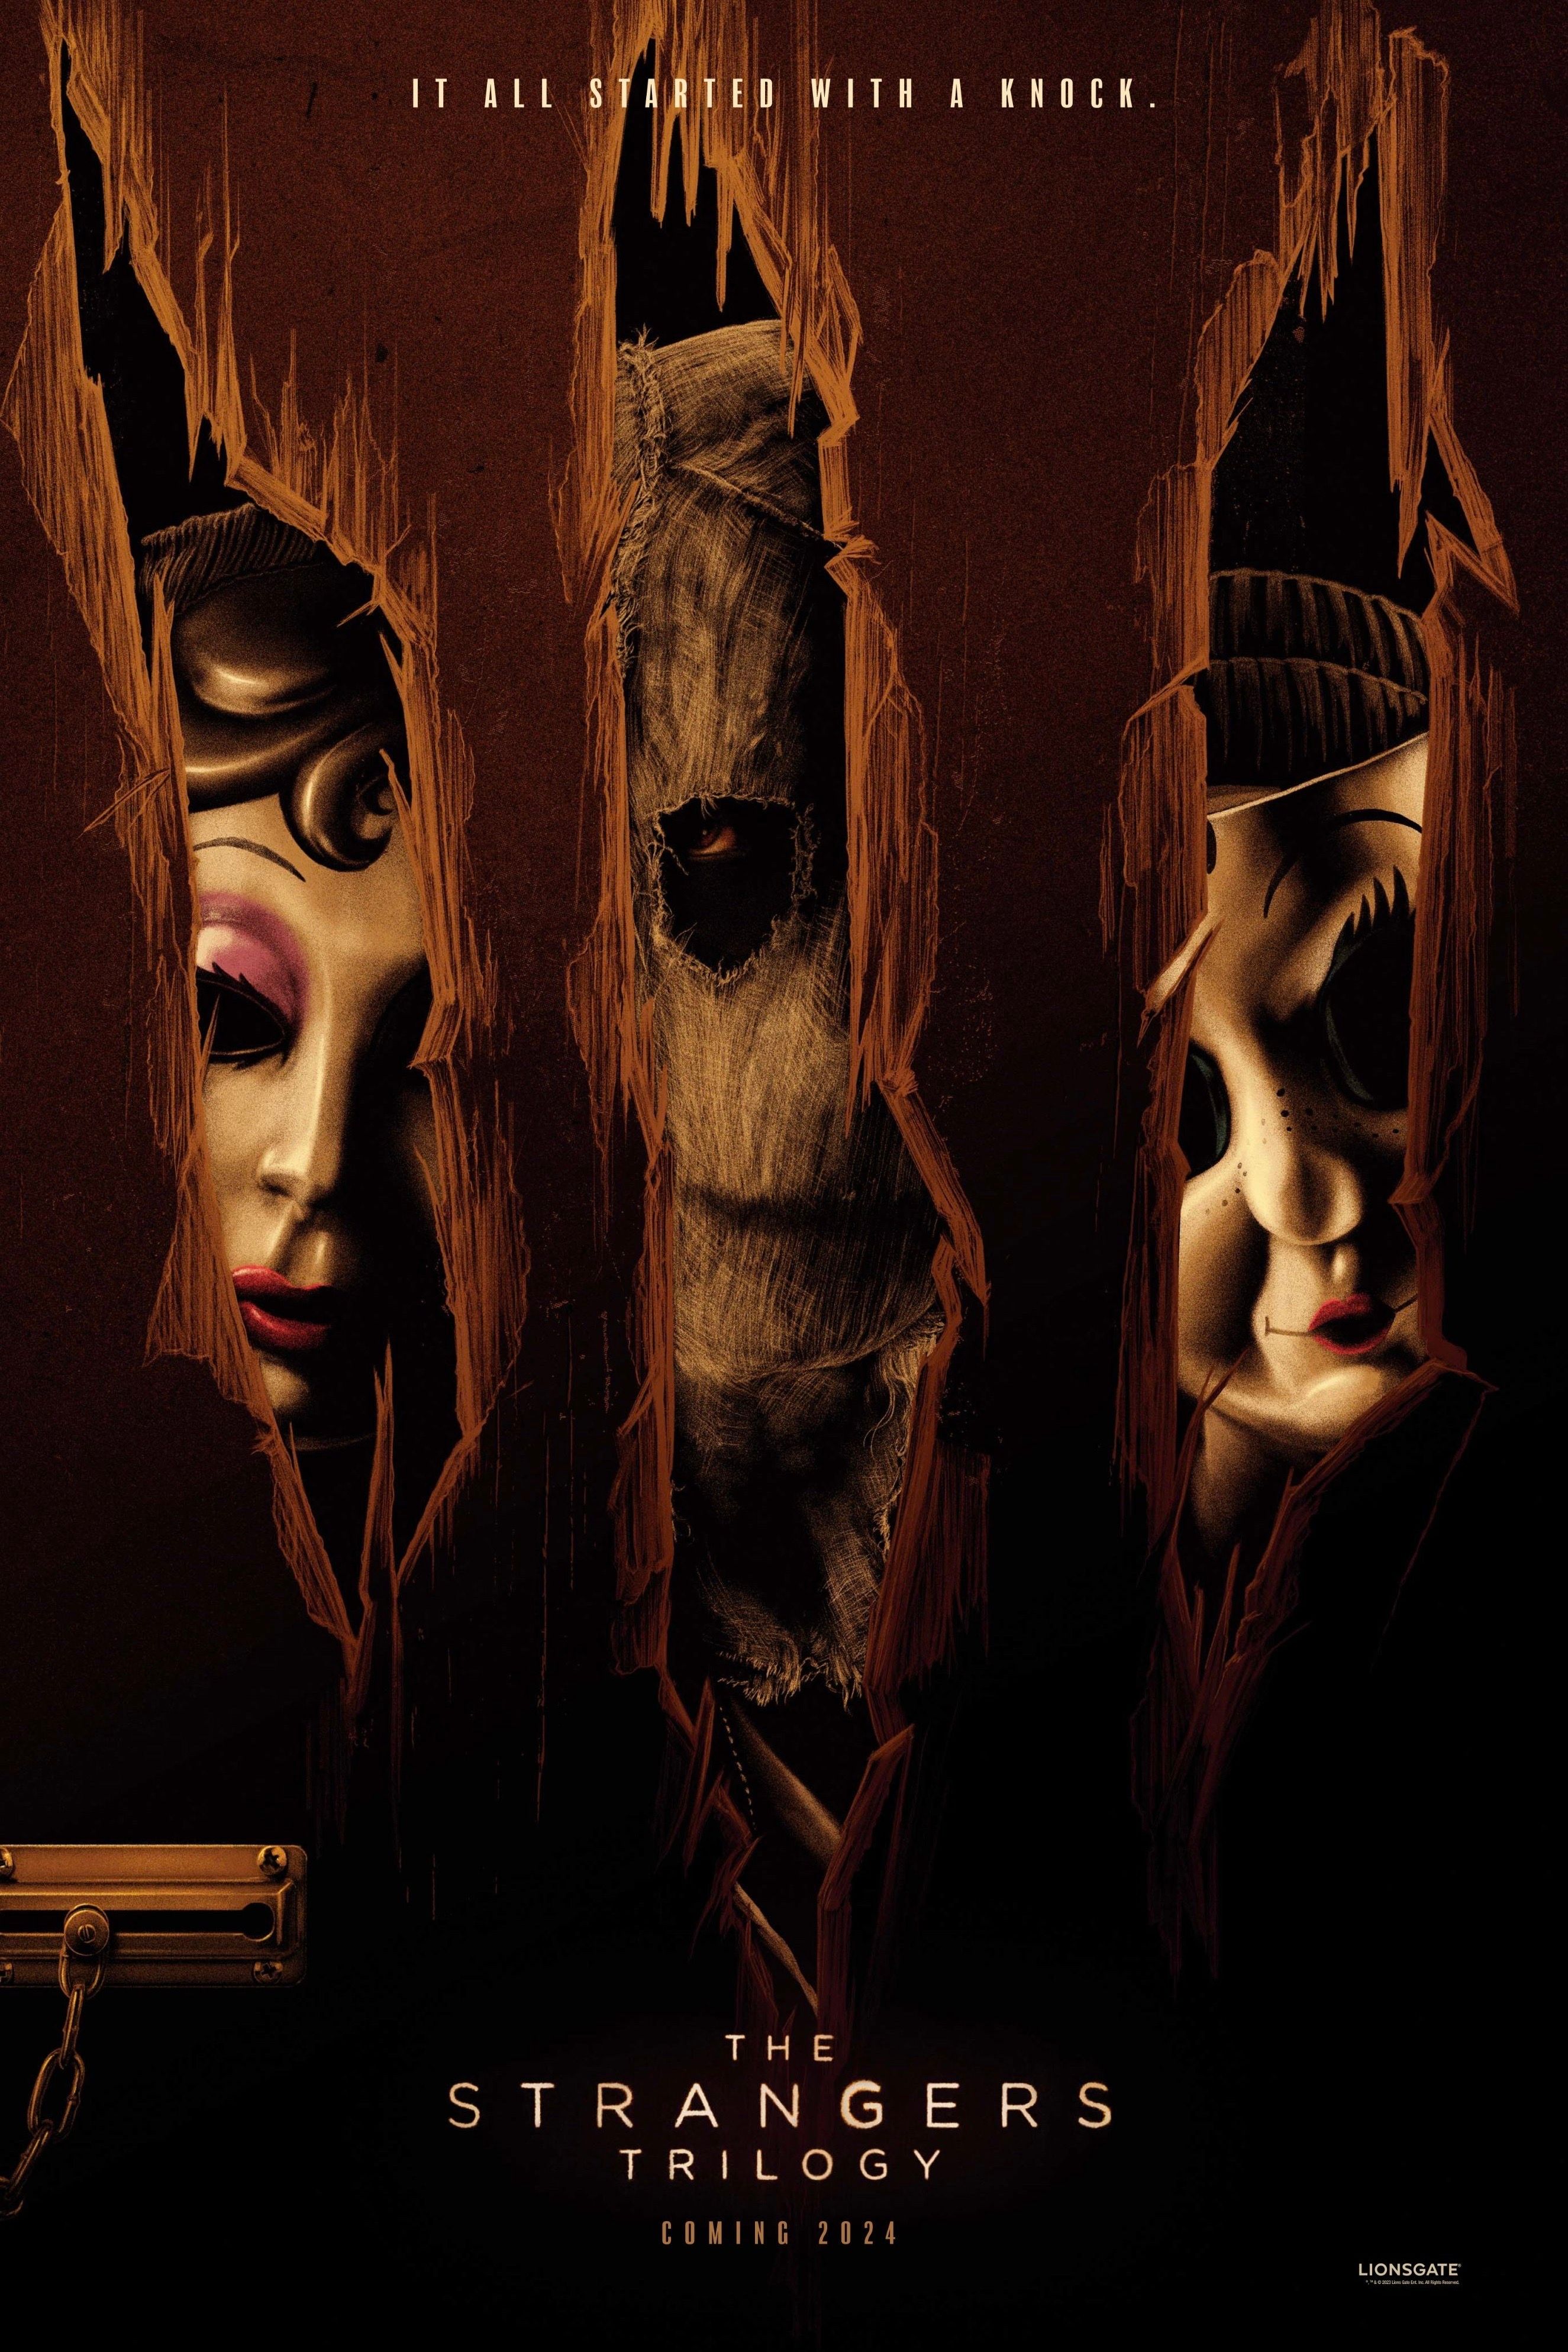 The Strangers Trilogy Will Explore Unanswered Questions From The